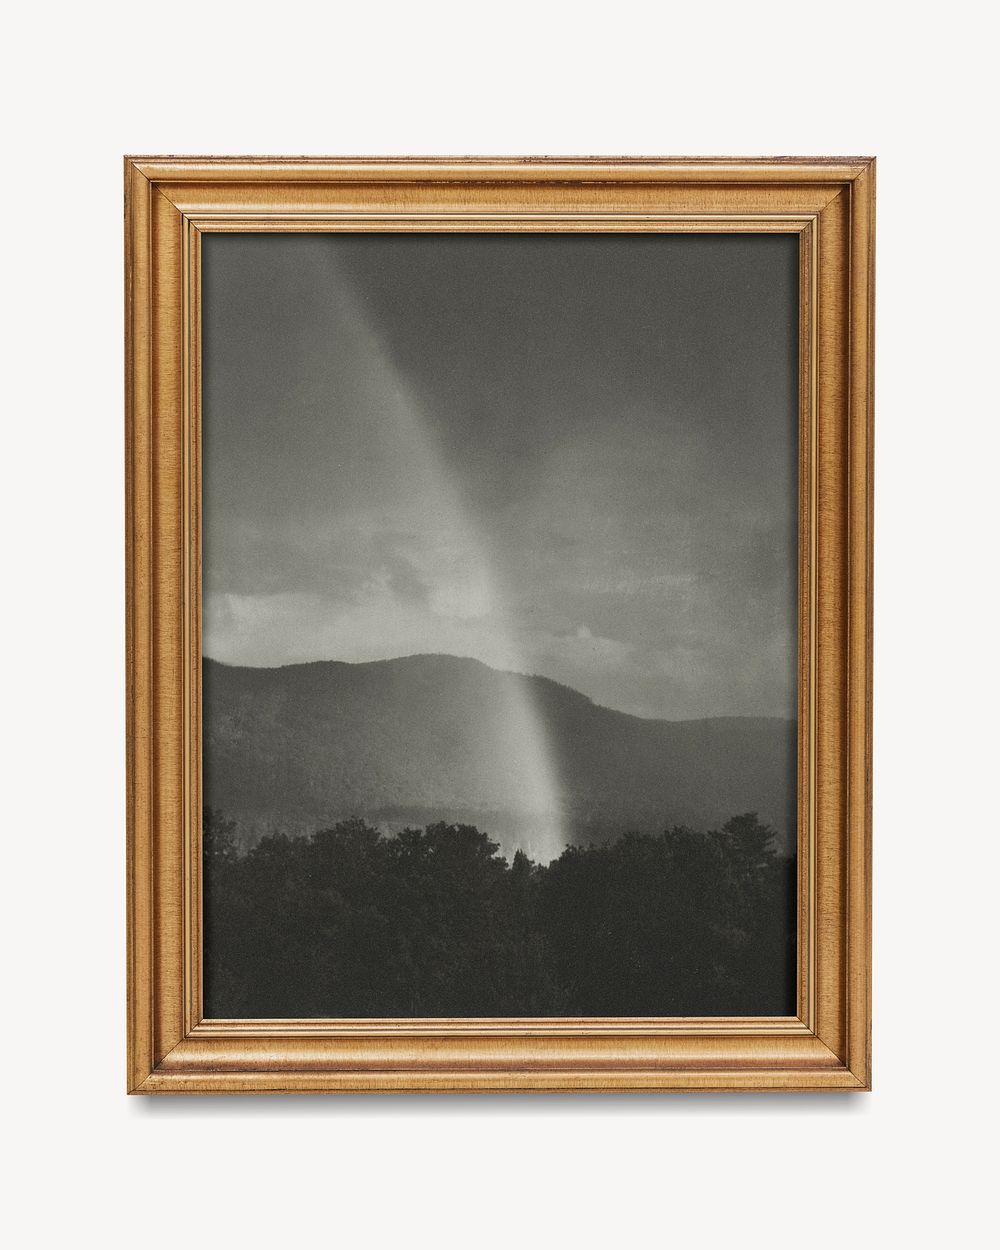 Alfred Stieglitz's Rainbow, gold frame remixed by rawpixel